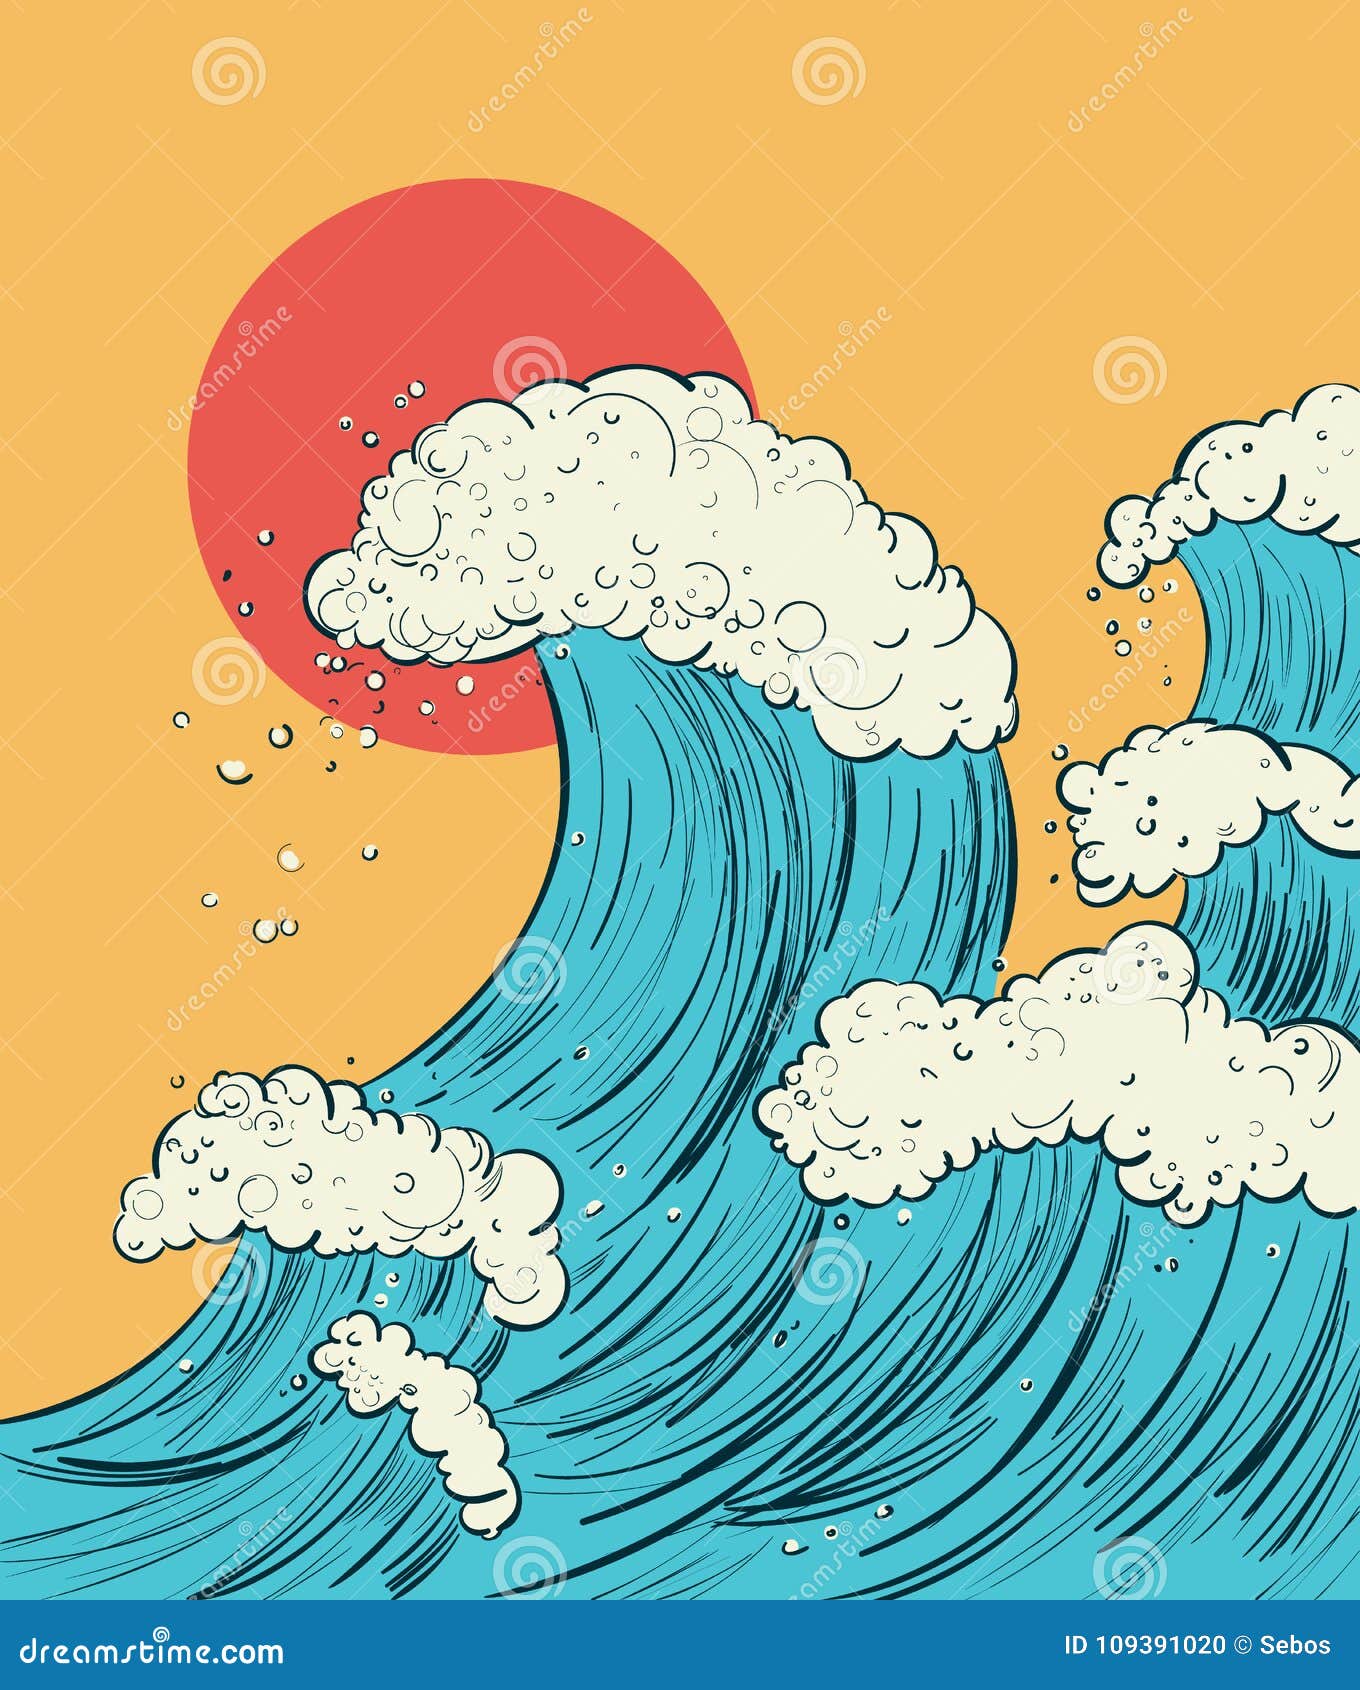 Hand Draw A Cartoon Illustration Of The Wave In Japanese Style